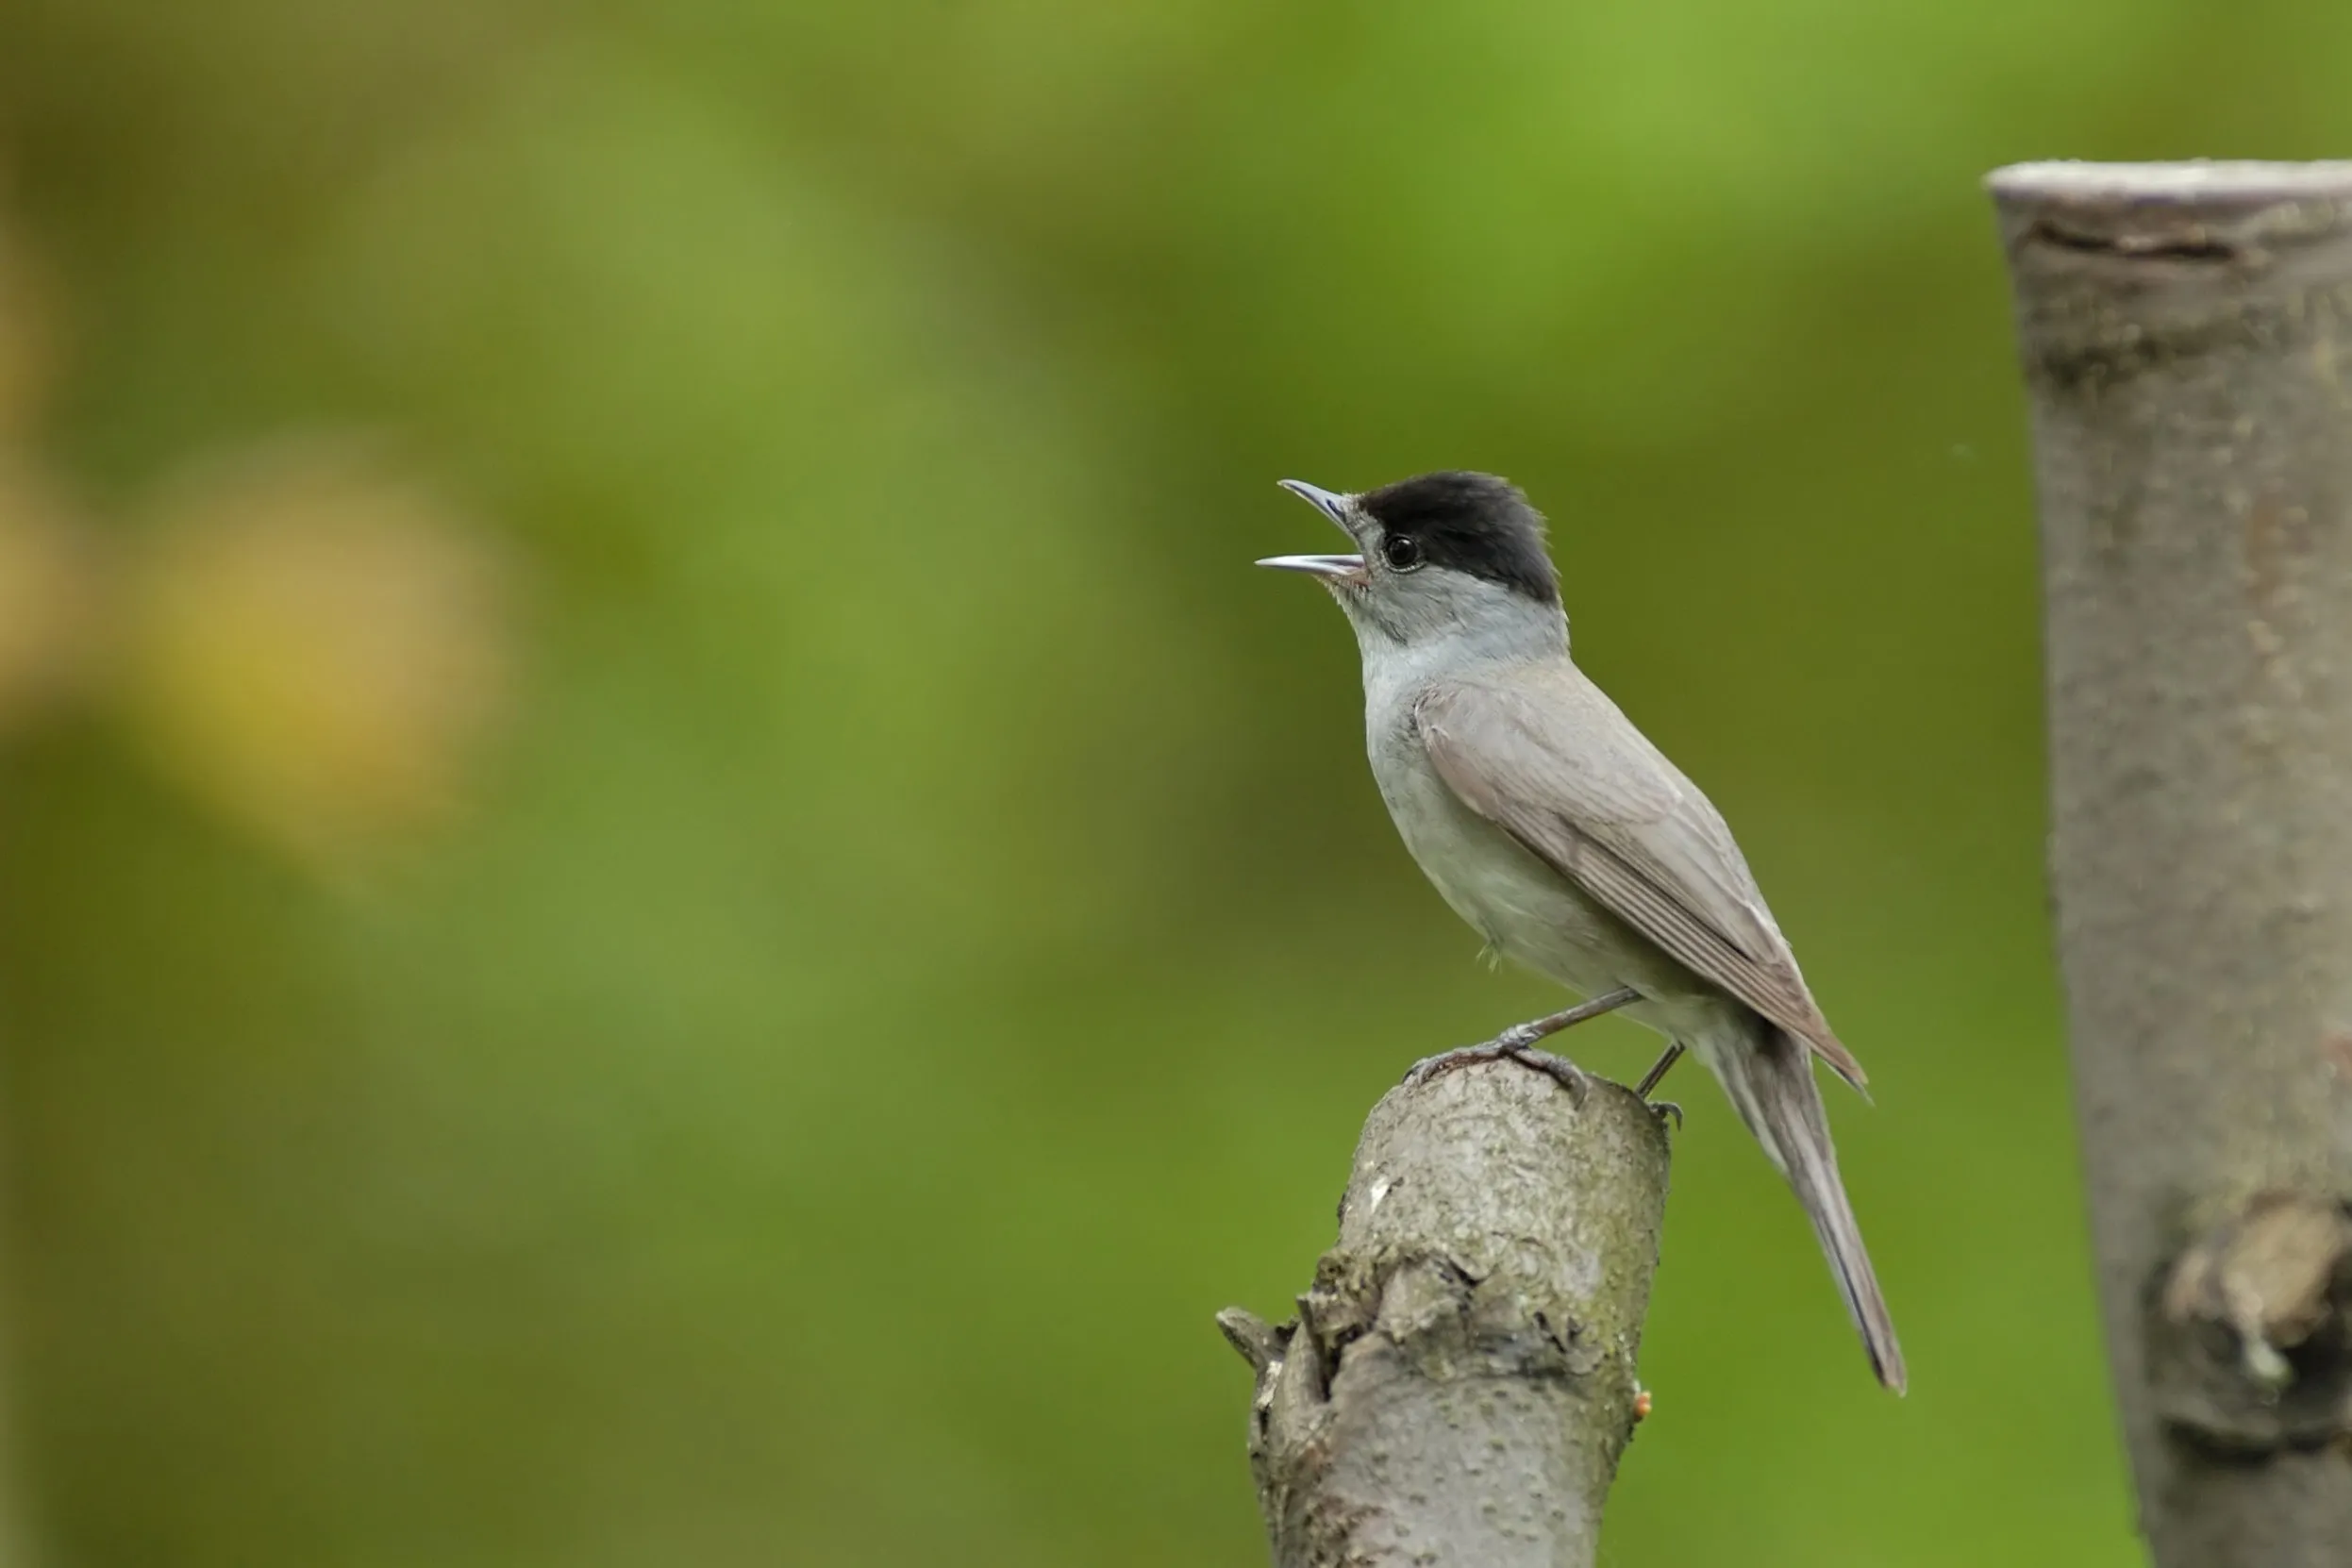 A lone Blackcap singing whilst perched on a tree stump.